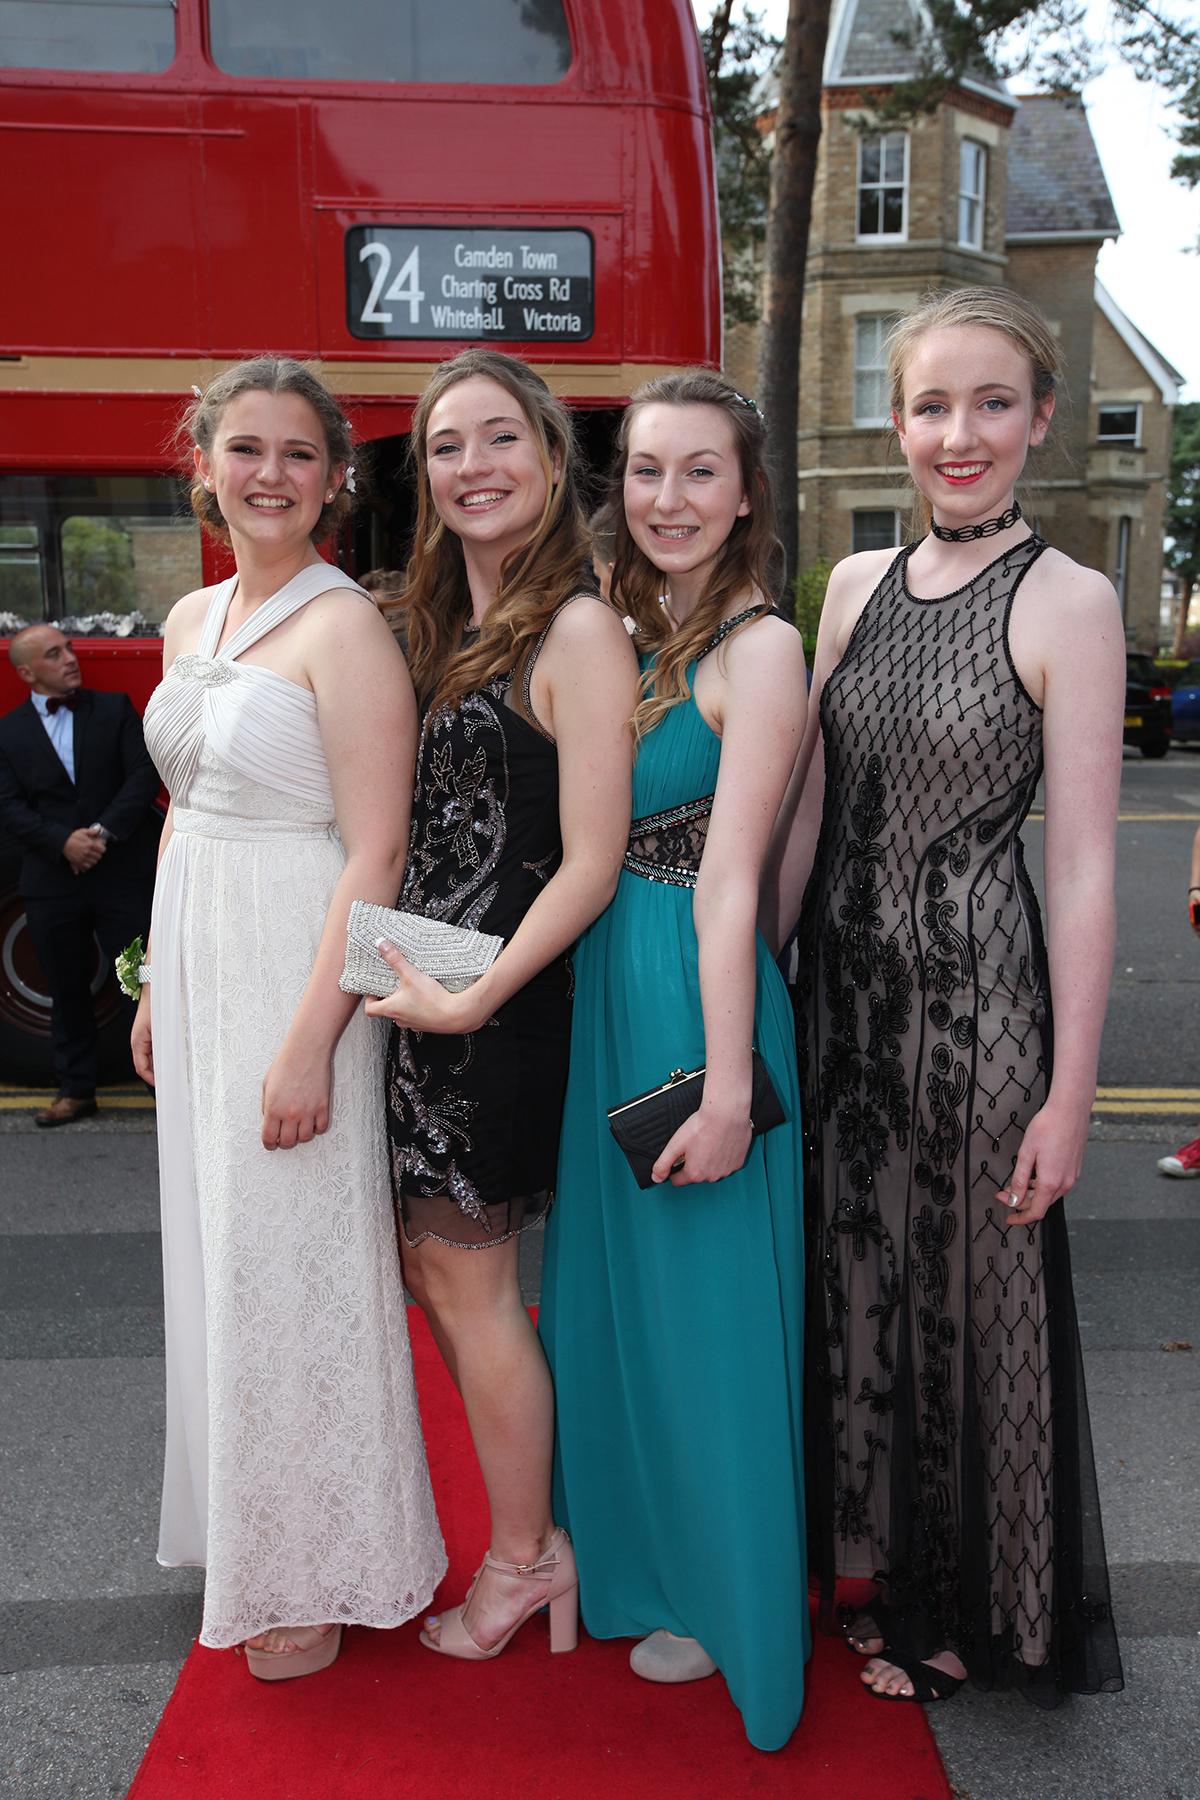 Photos from the Ringwood School's Year 11 prom 2015.